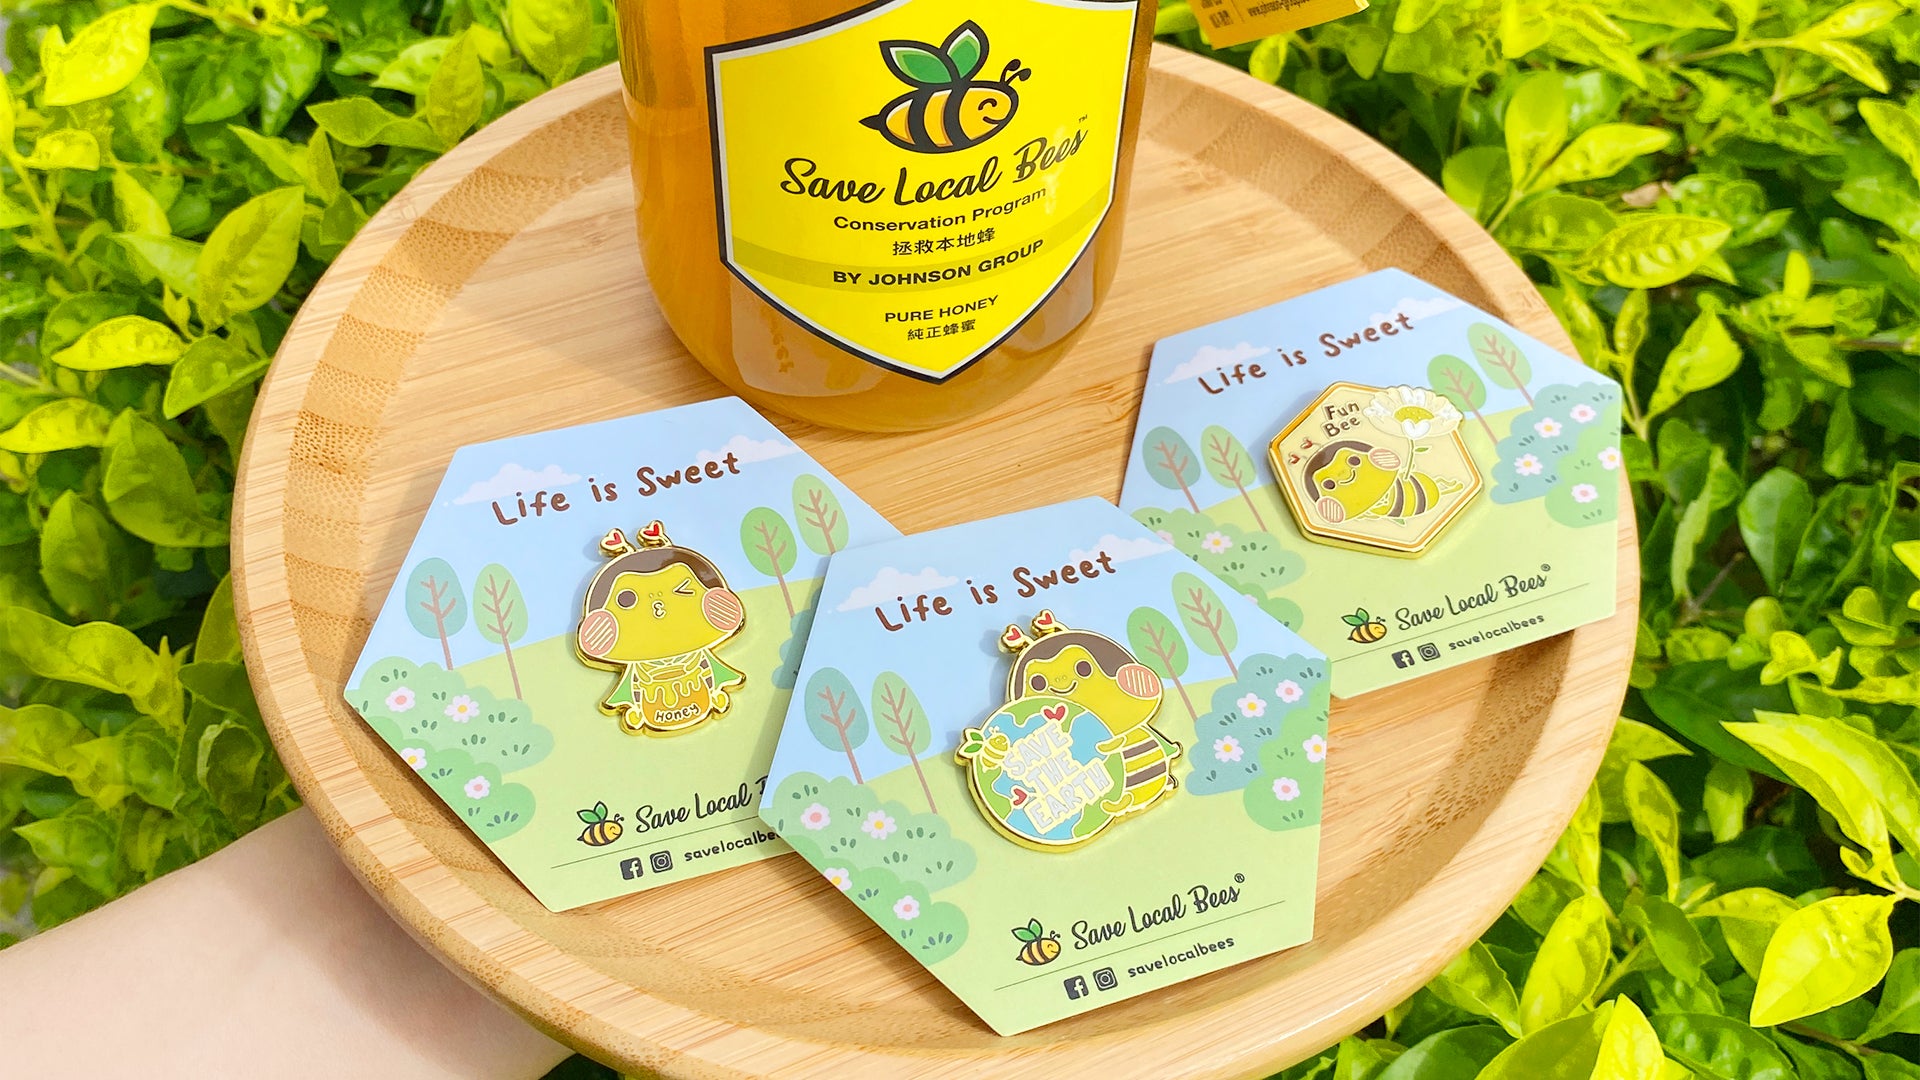 【Save Local Bees】Buy Our Latest FunBee Merch to Support Local Bees!